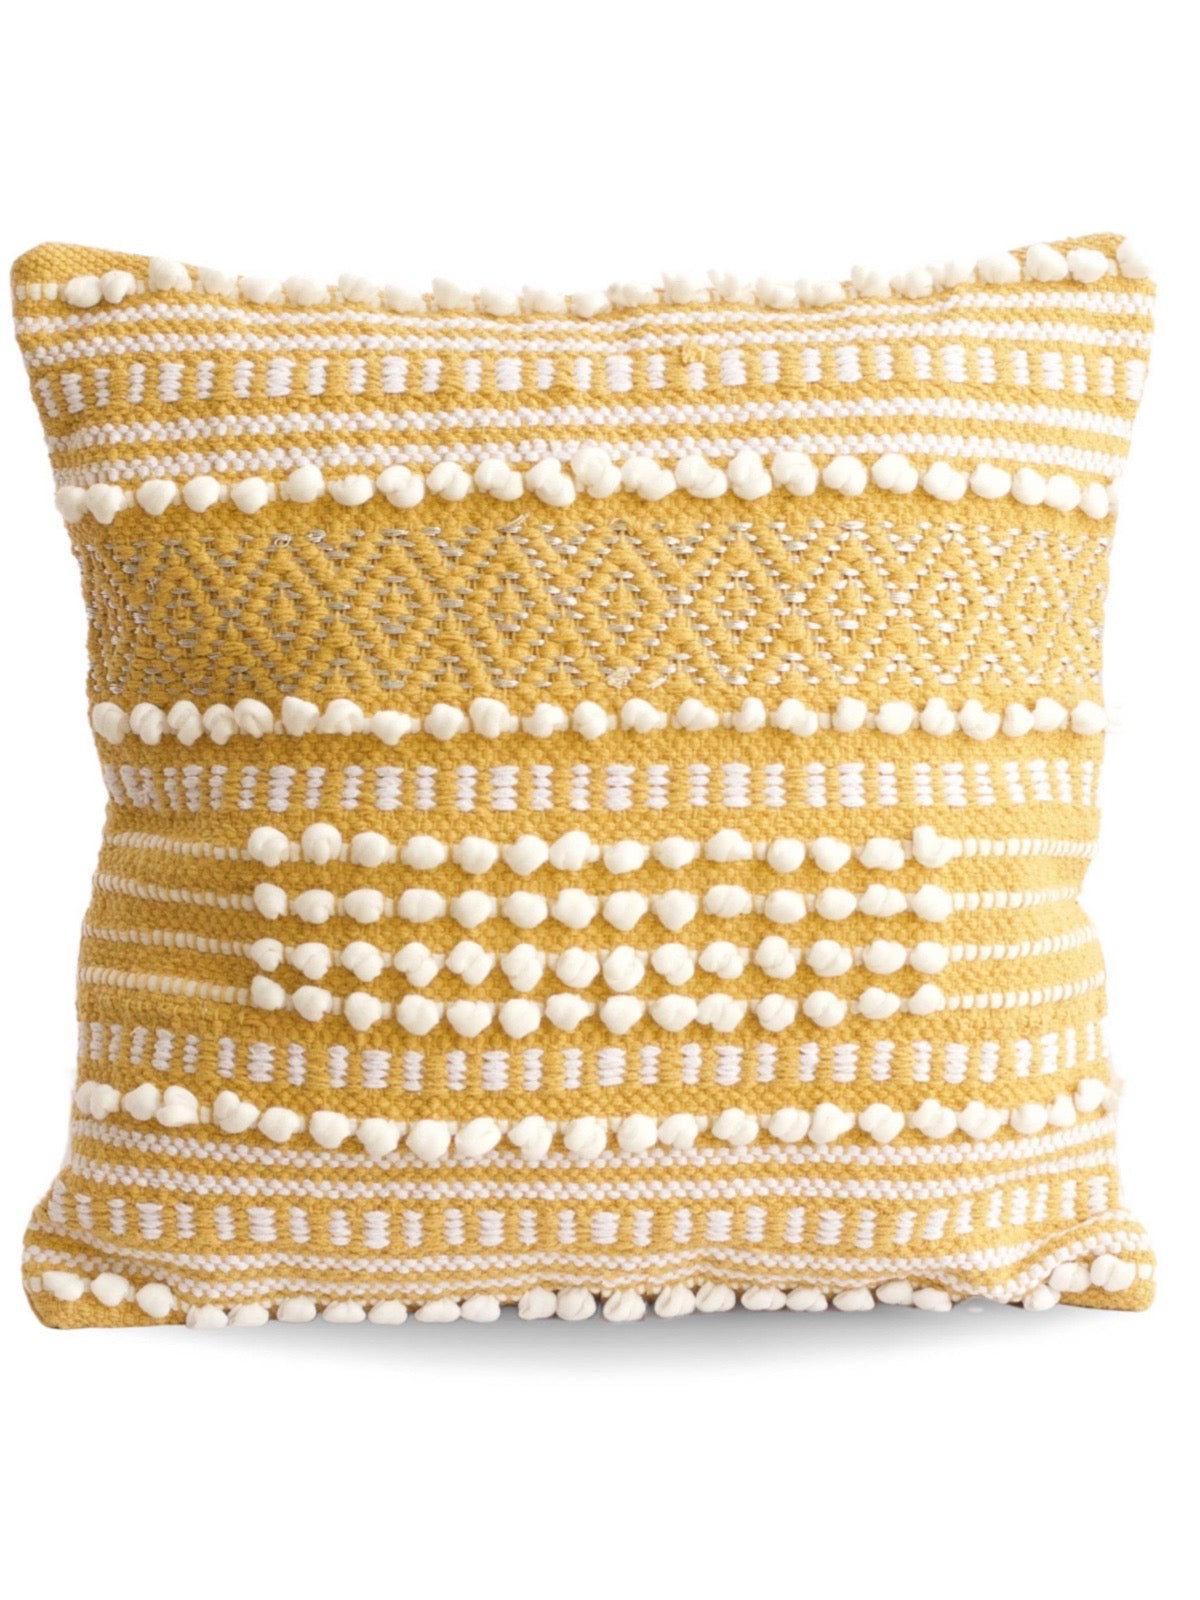 This 100% Cotton Moroccan Wedding decorative pillow is inspired by the special meaning behind the traditions of the Moroccan Wedding blanket. Measures 18x18 and Sold by KYA Home Decor